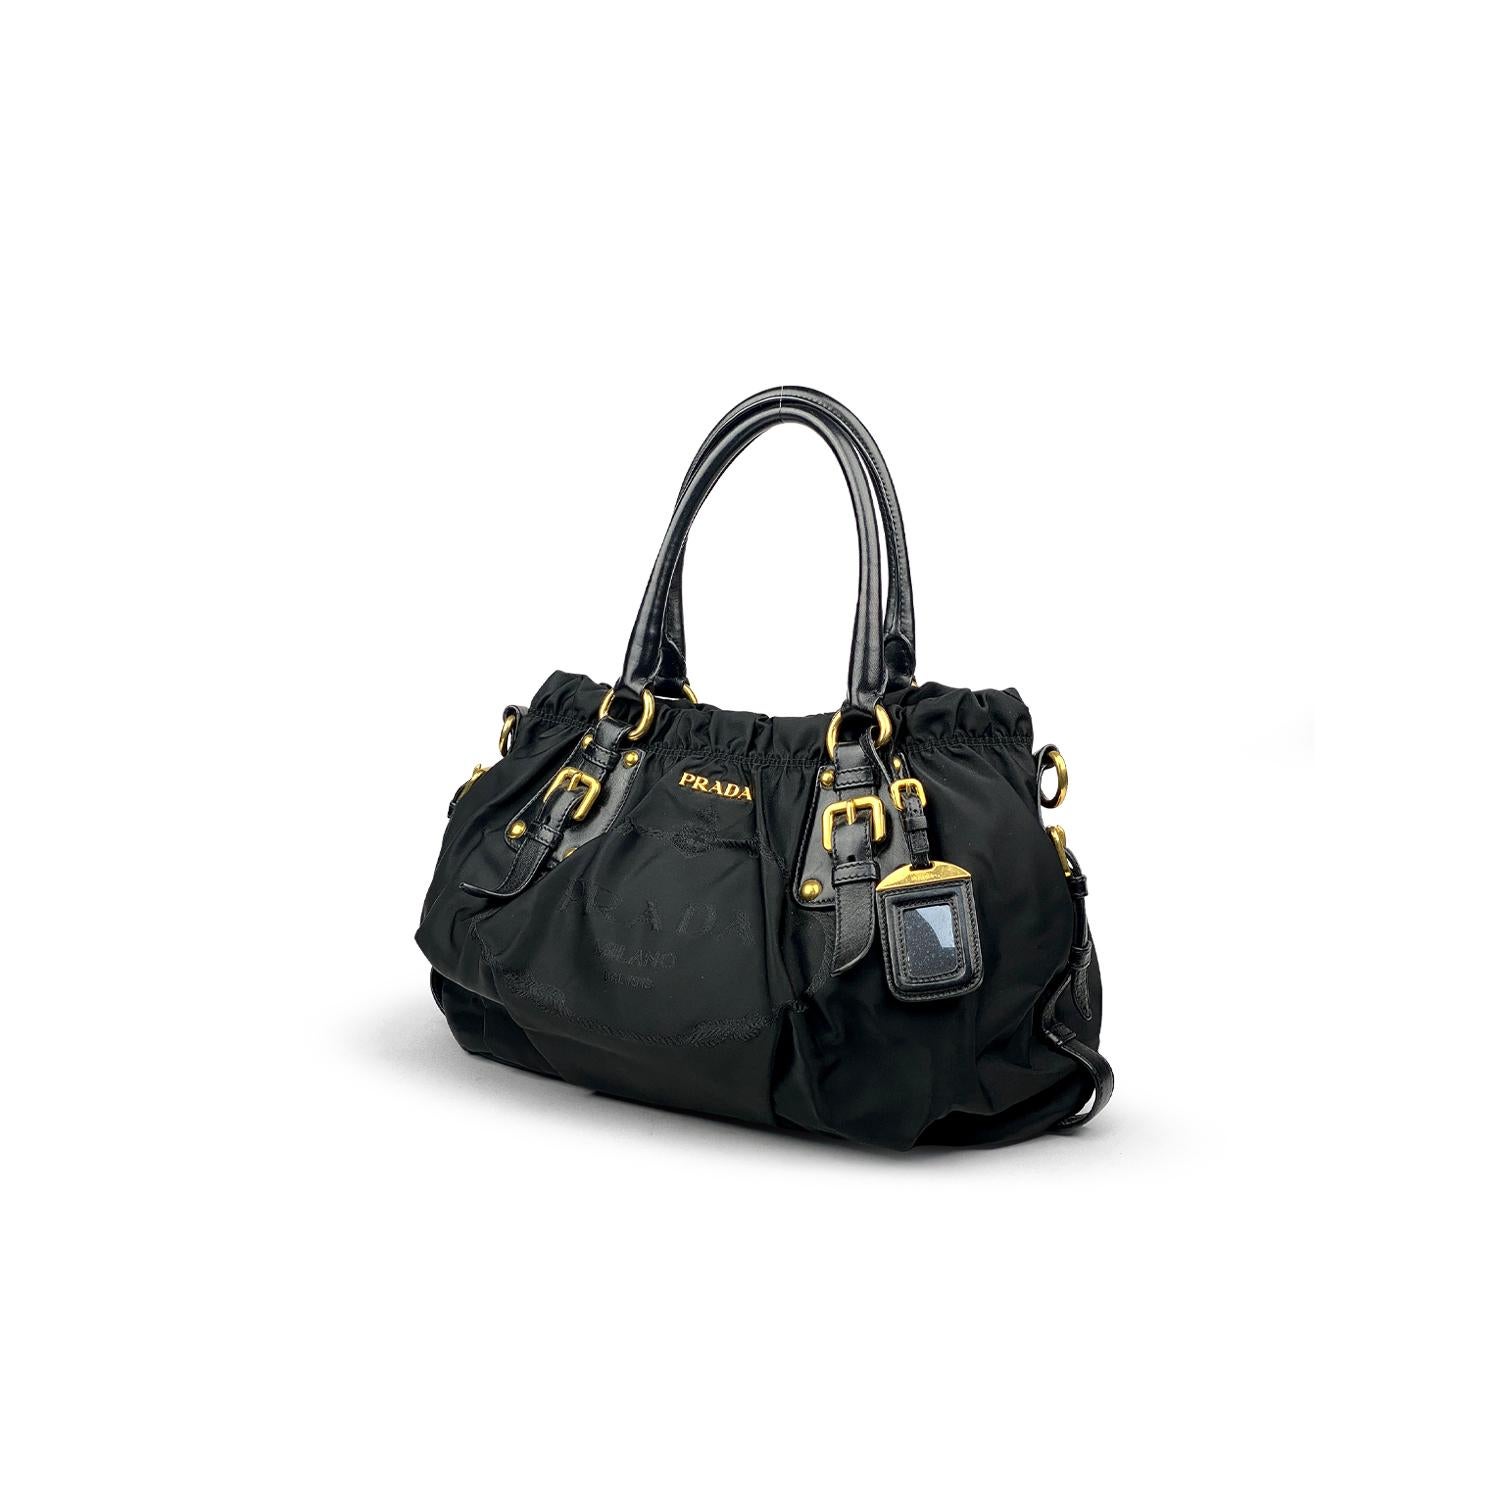 Black Tessuto nylon Prada satchel with 

- Gold-tone hardware
- Dual rolled handles
- Black leather trim
- Embroidered logo at front
- Black logo jacquard lining, dual interior pockets; one with zip closure and snap closure at top

Overall Preloved